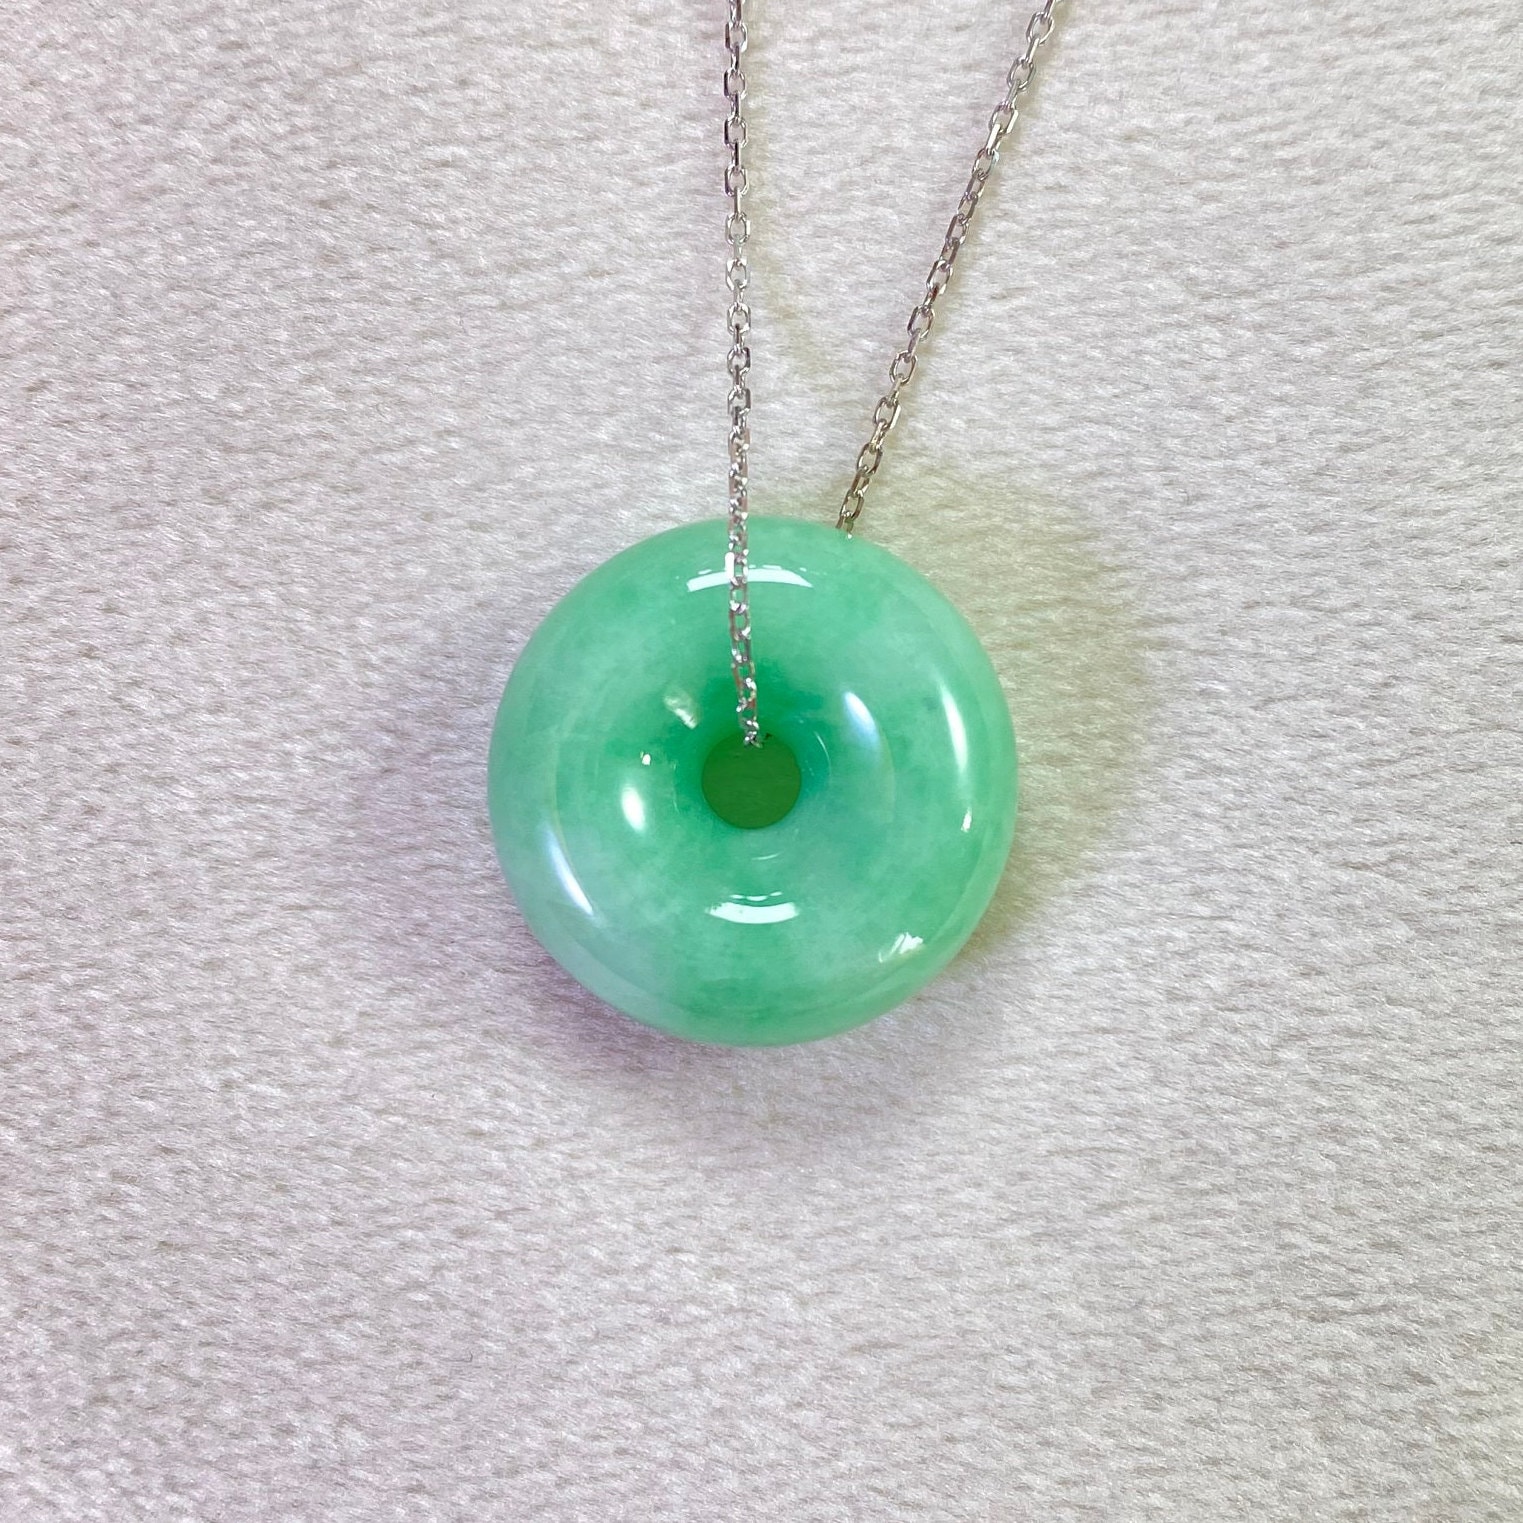 Buy 14K Gold Jade Necklace, Natural Nephrite Jade Pendant, Canadian BC Jade,  Birthday Gift for Women, Valentines Gift Online in India - Etsy